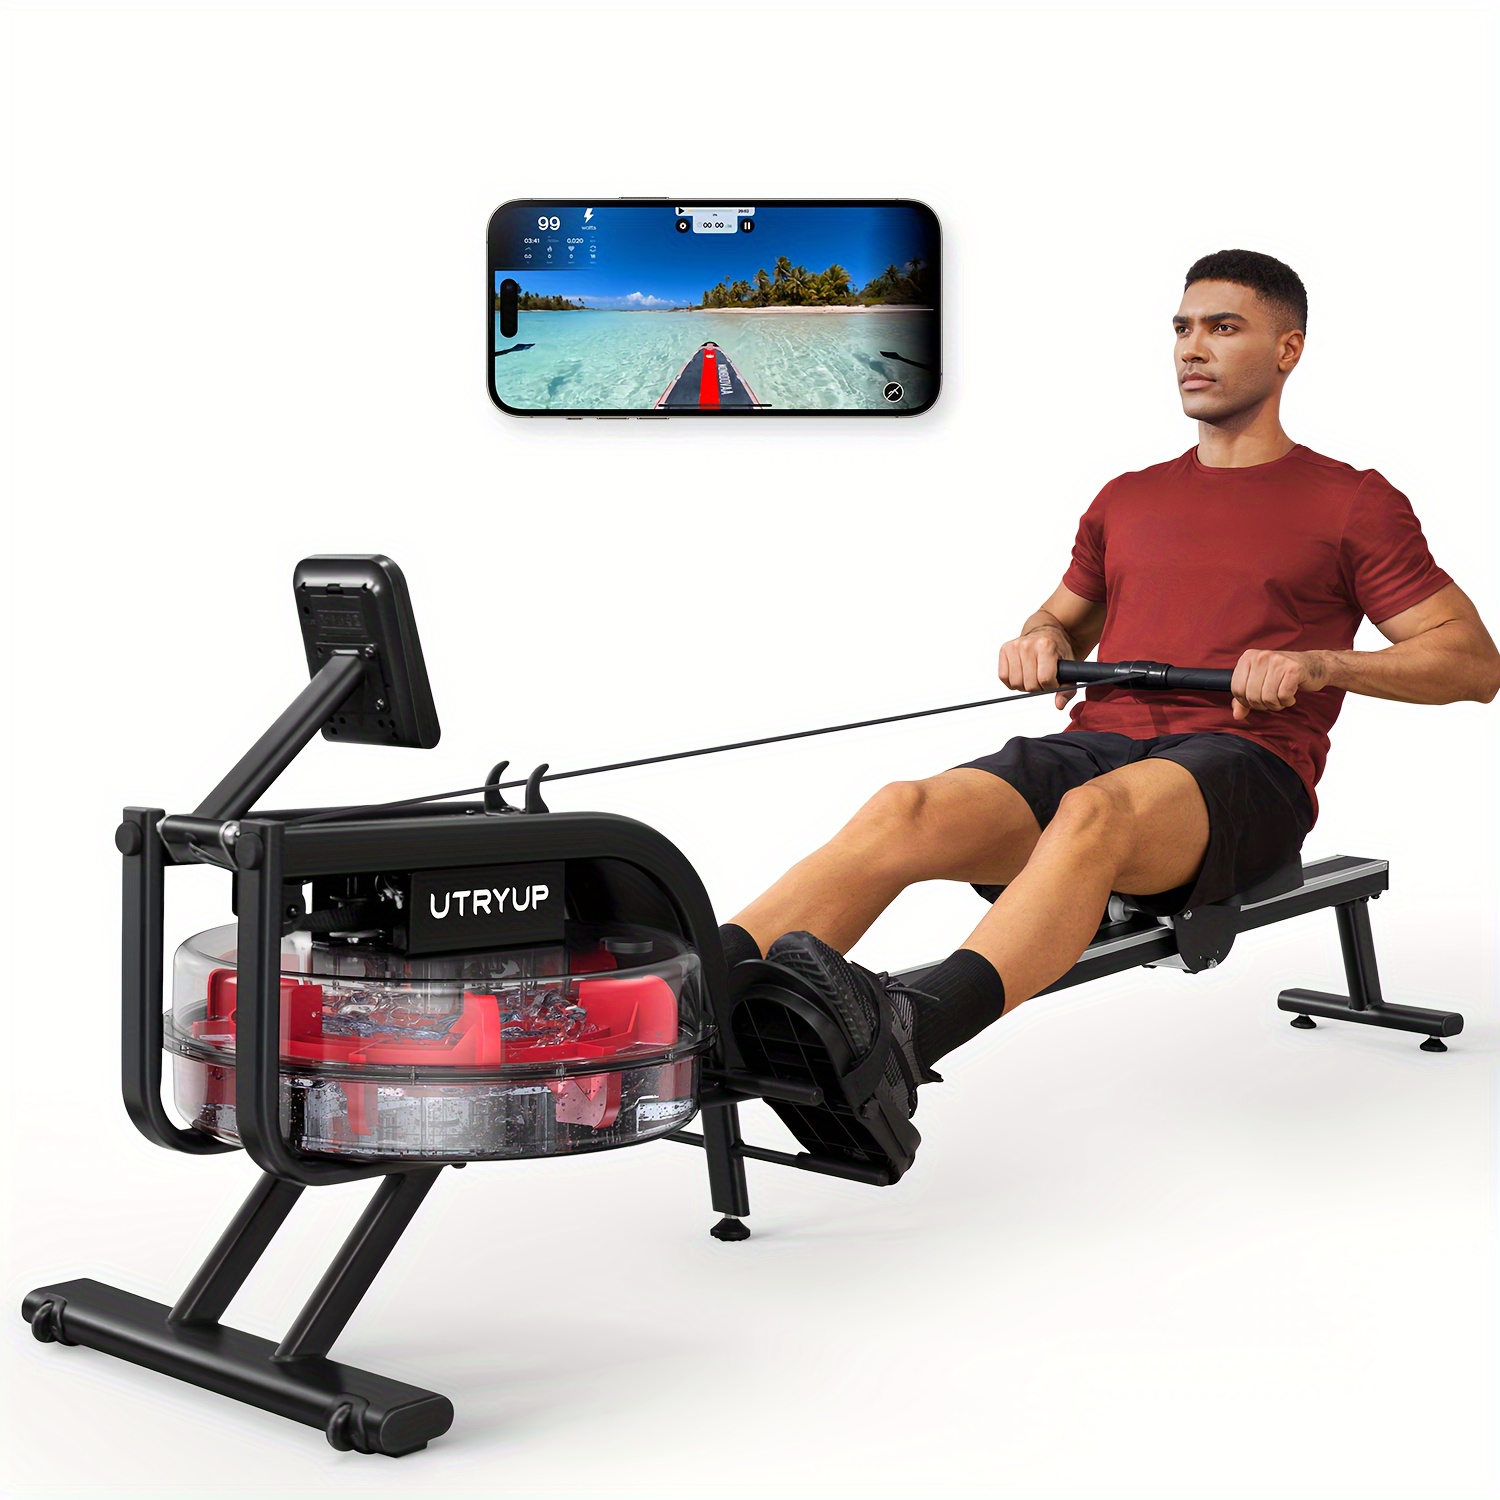 

Magnetic/water Rowing Machines For Home, Compact And Saves Space - Vertical/folding Storage, 350 Lb Weight Capacity, Tablet Holder And Comfortable Seat Cushion